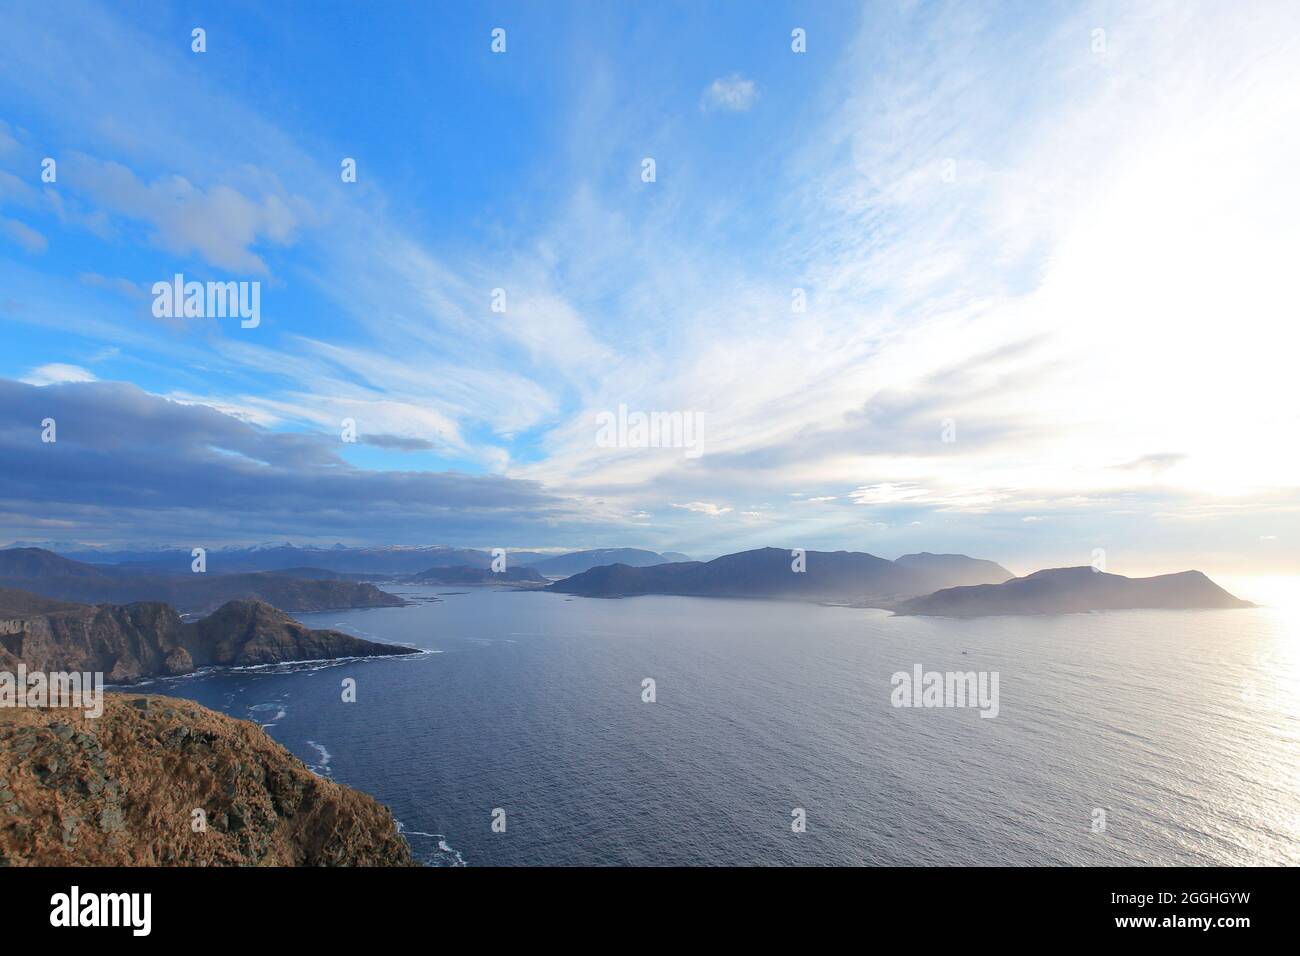 Ocean view with mountains in background at Runde in Norway. Beautiful panorama. Stock Photo